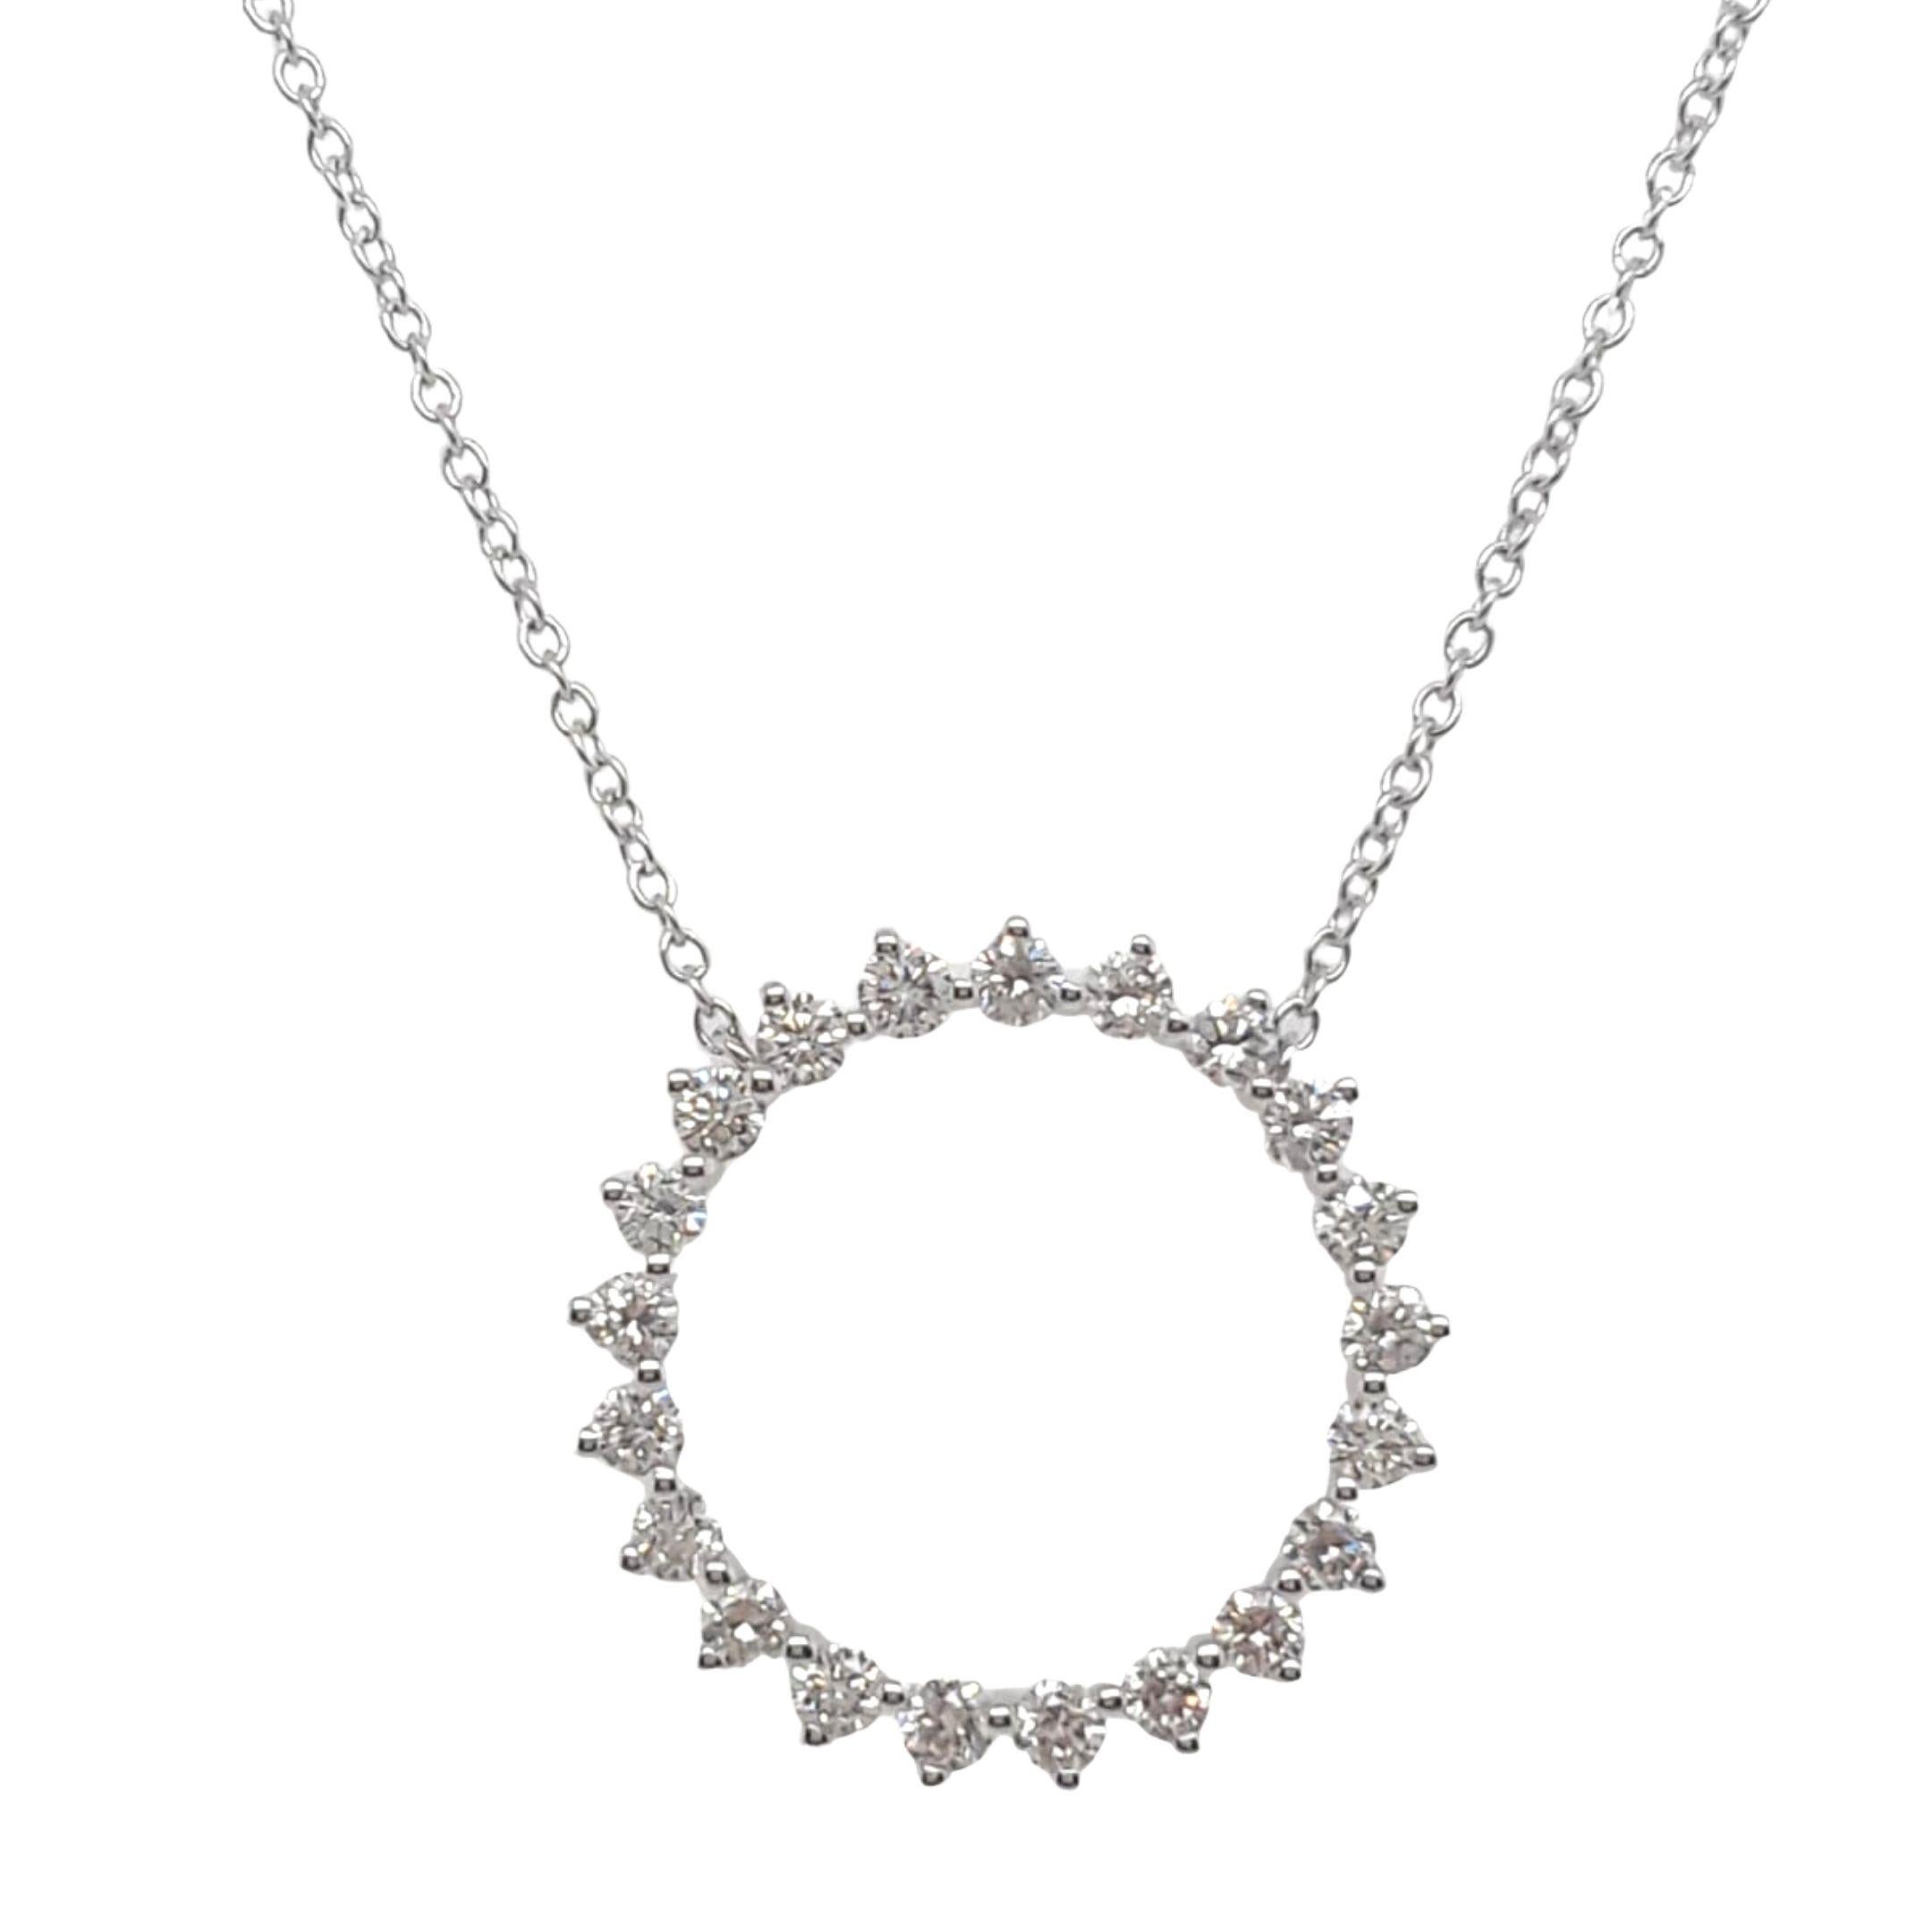 Large Circle Diamond Pendant Necklace made with real/natural brilliant cut diamonds. Diamond Weight: 0.85 carats, Diamond Quantity: 21 round diamonds. Color: G-H. Clarity: VS. Mounted on 18 karat white gold.